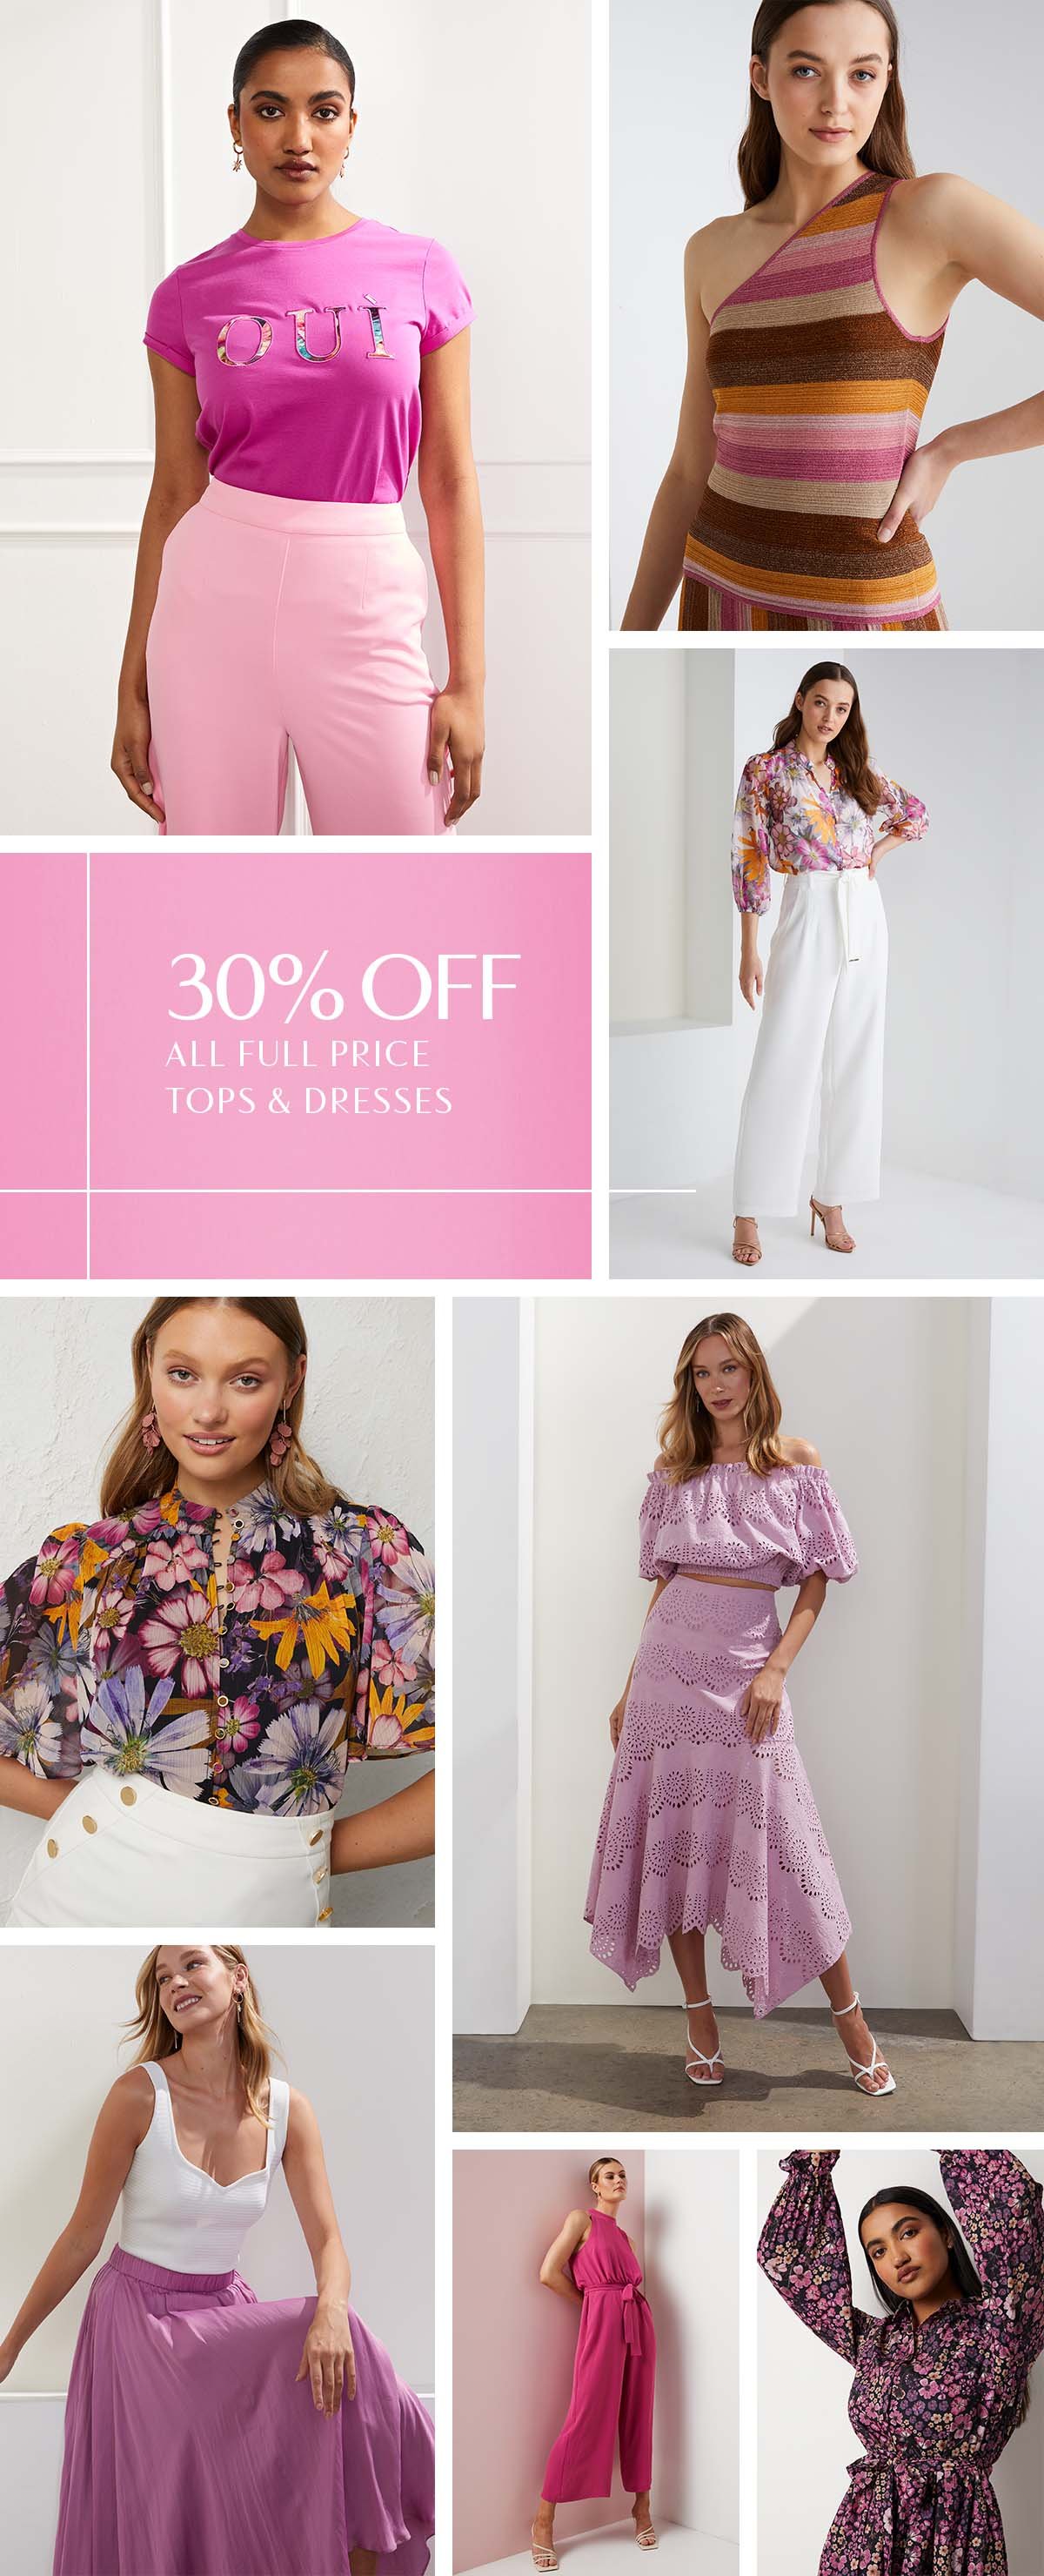 30% Off All Full Price Tops & Dreses.